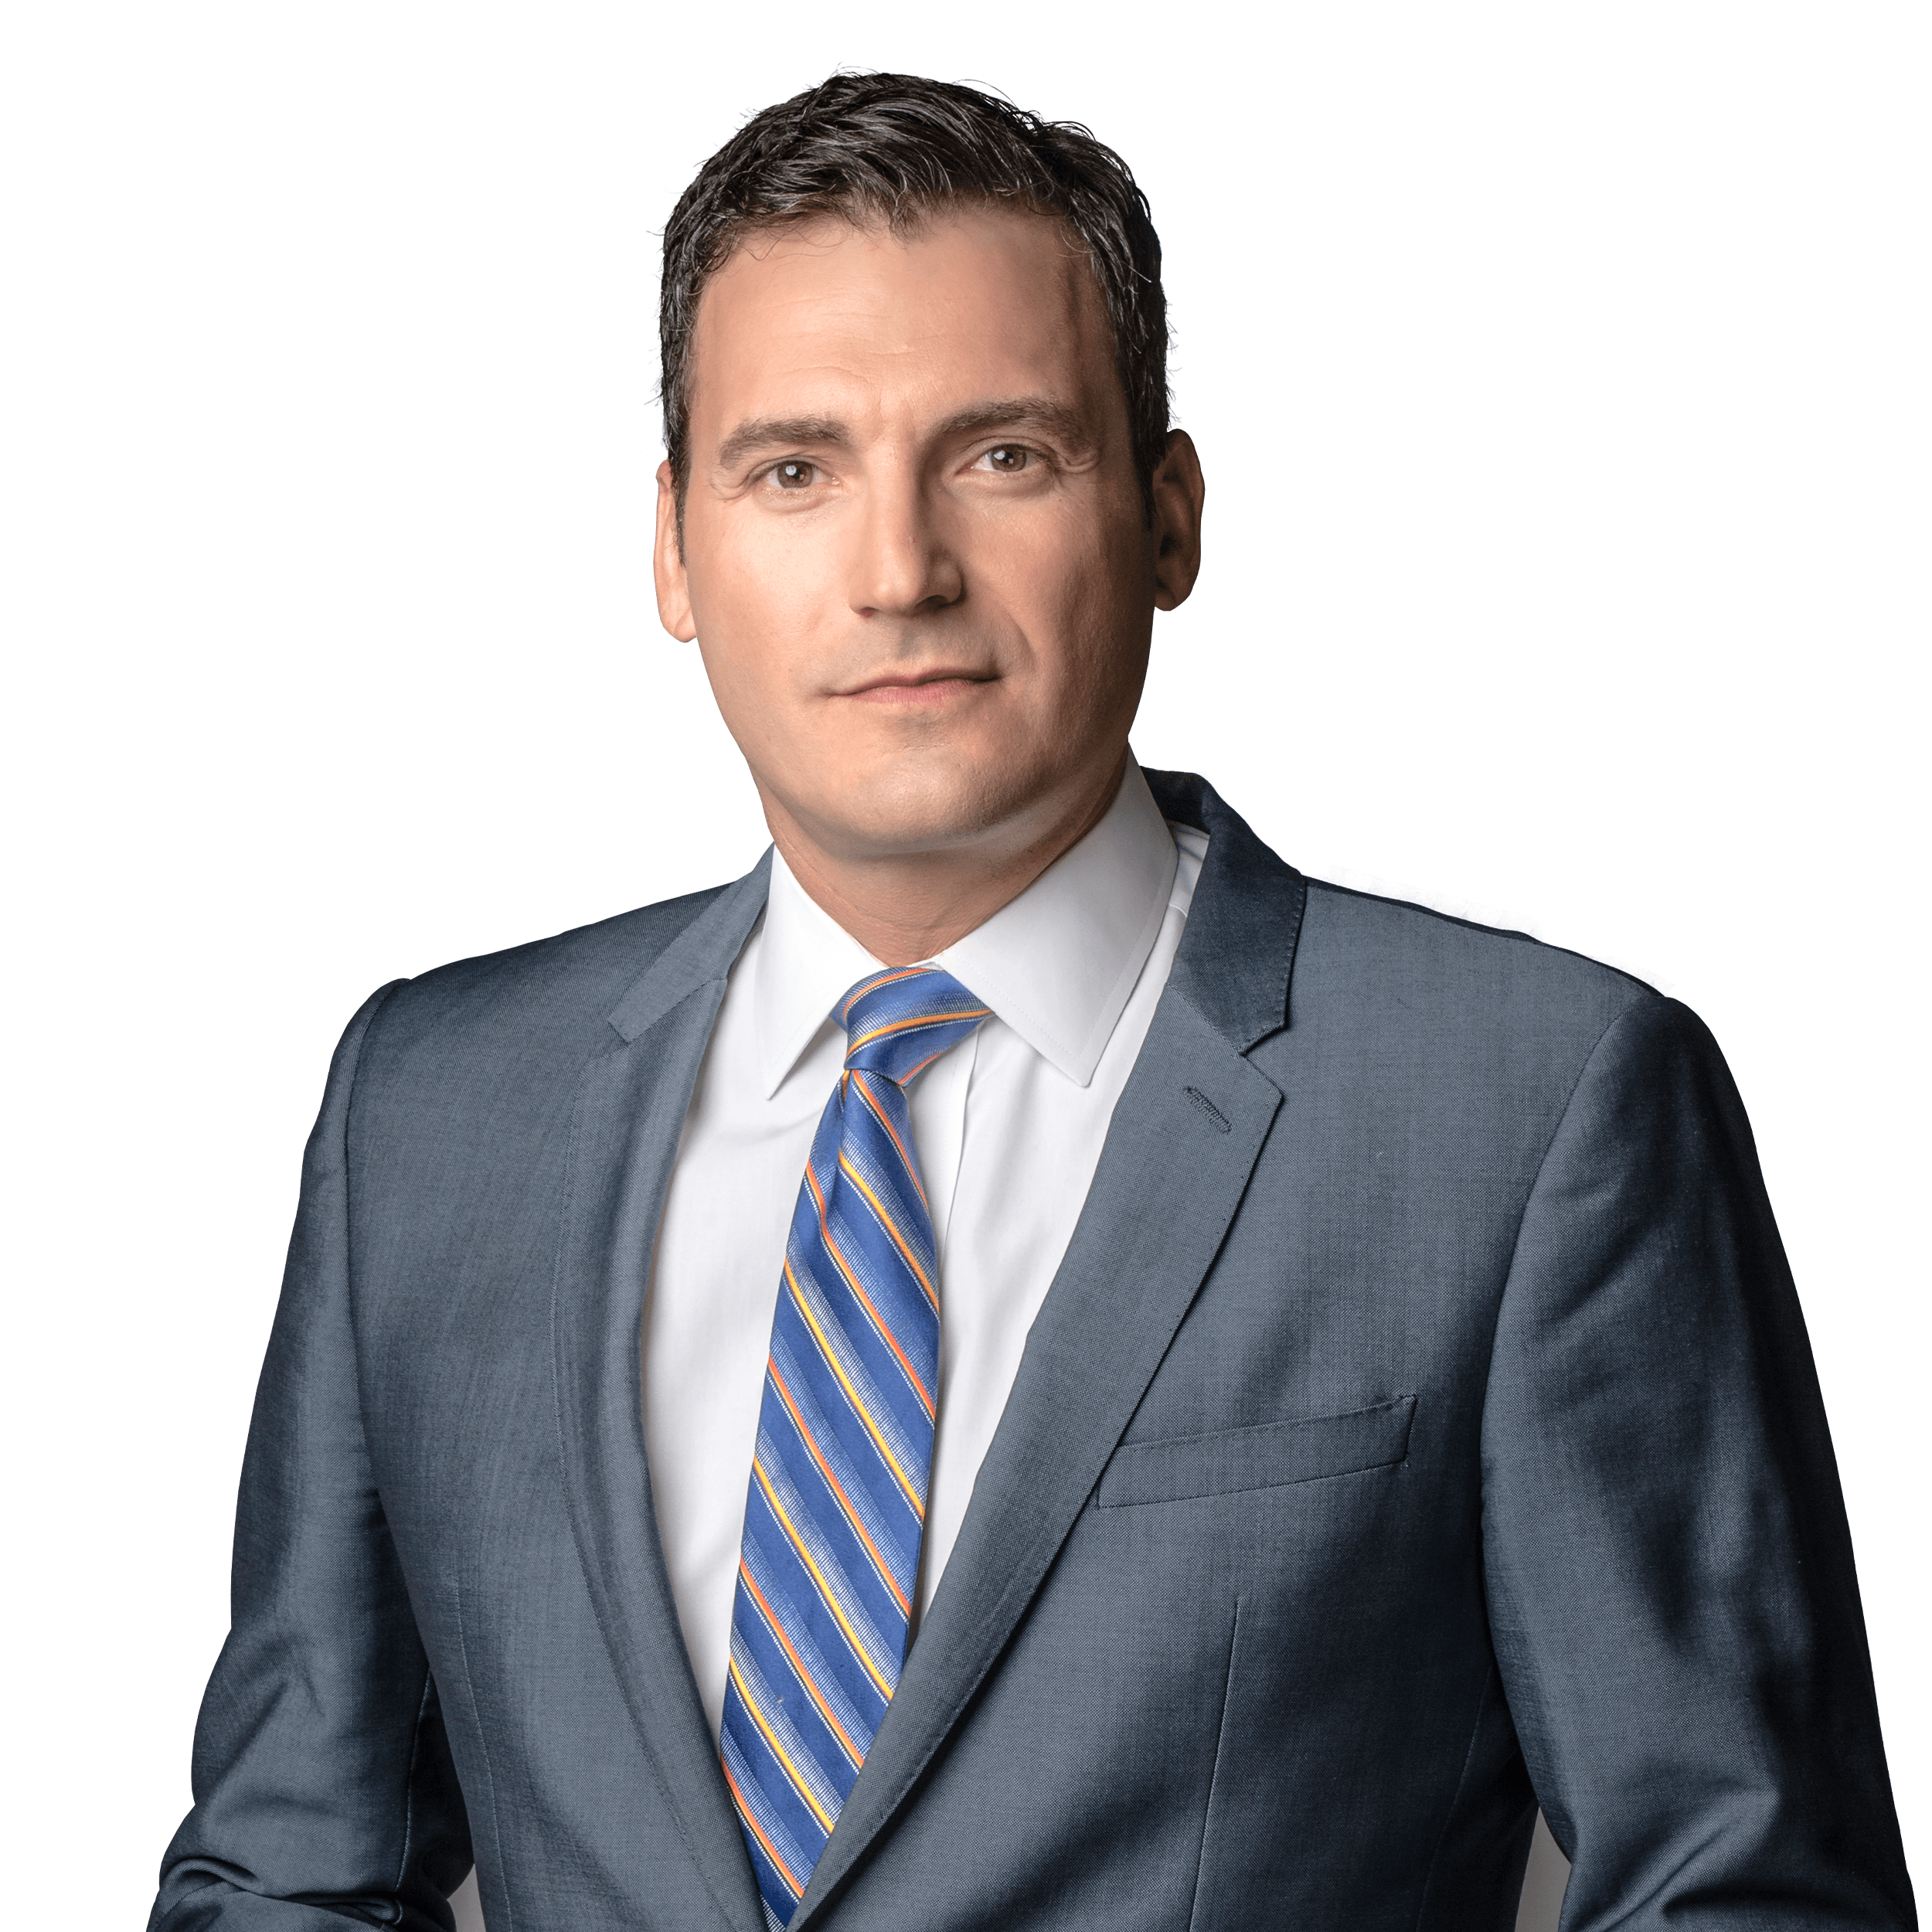 Hour 2 of The Evan Solomon Show for August 5th, 2020